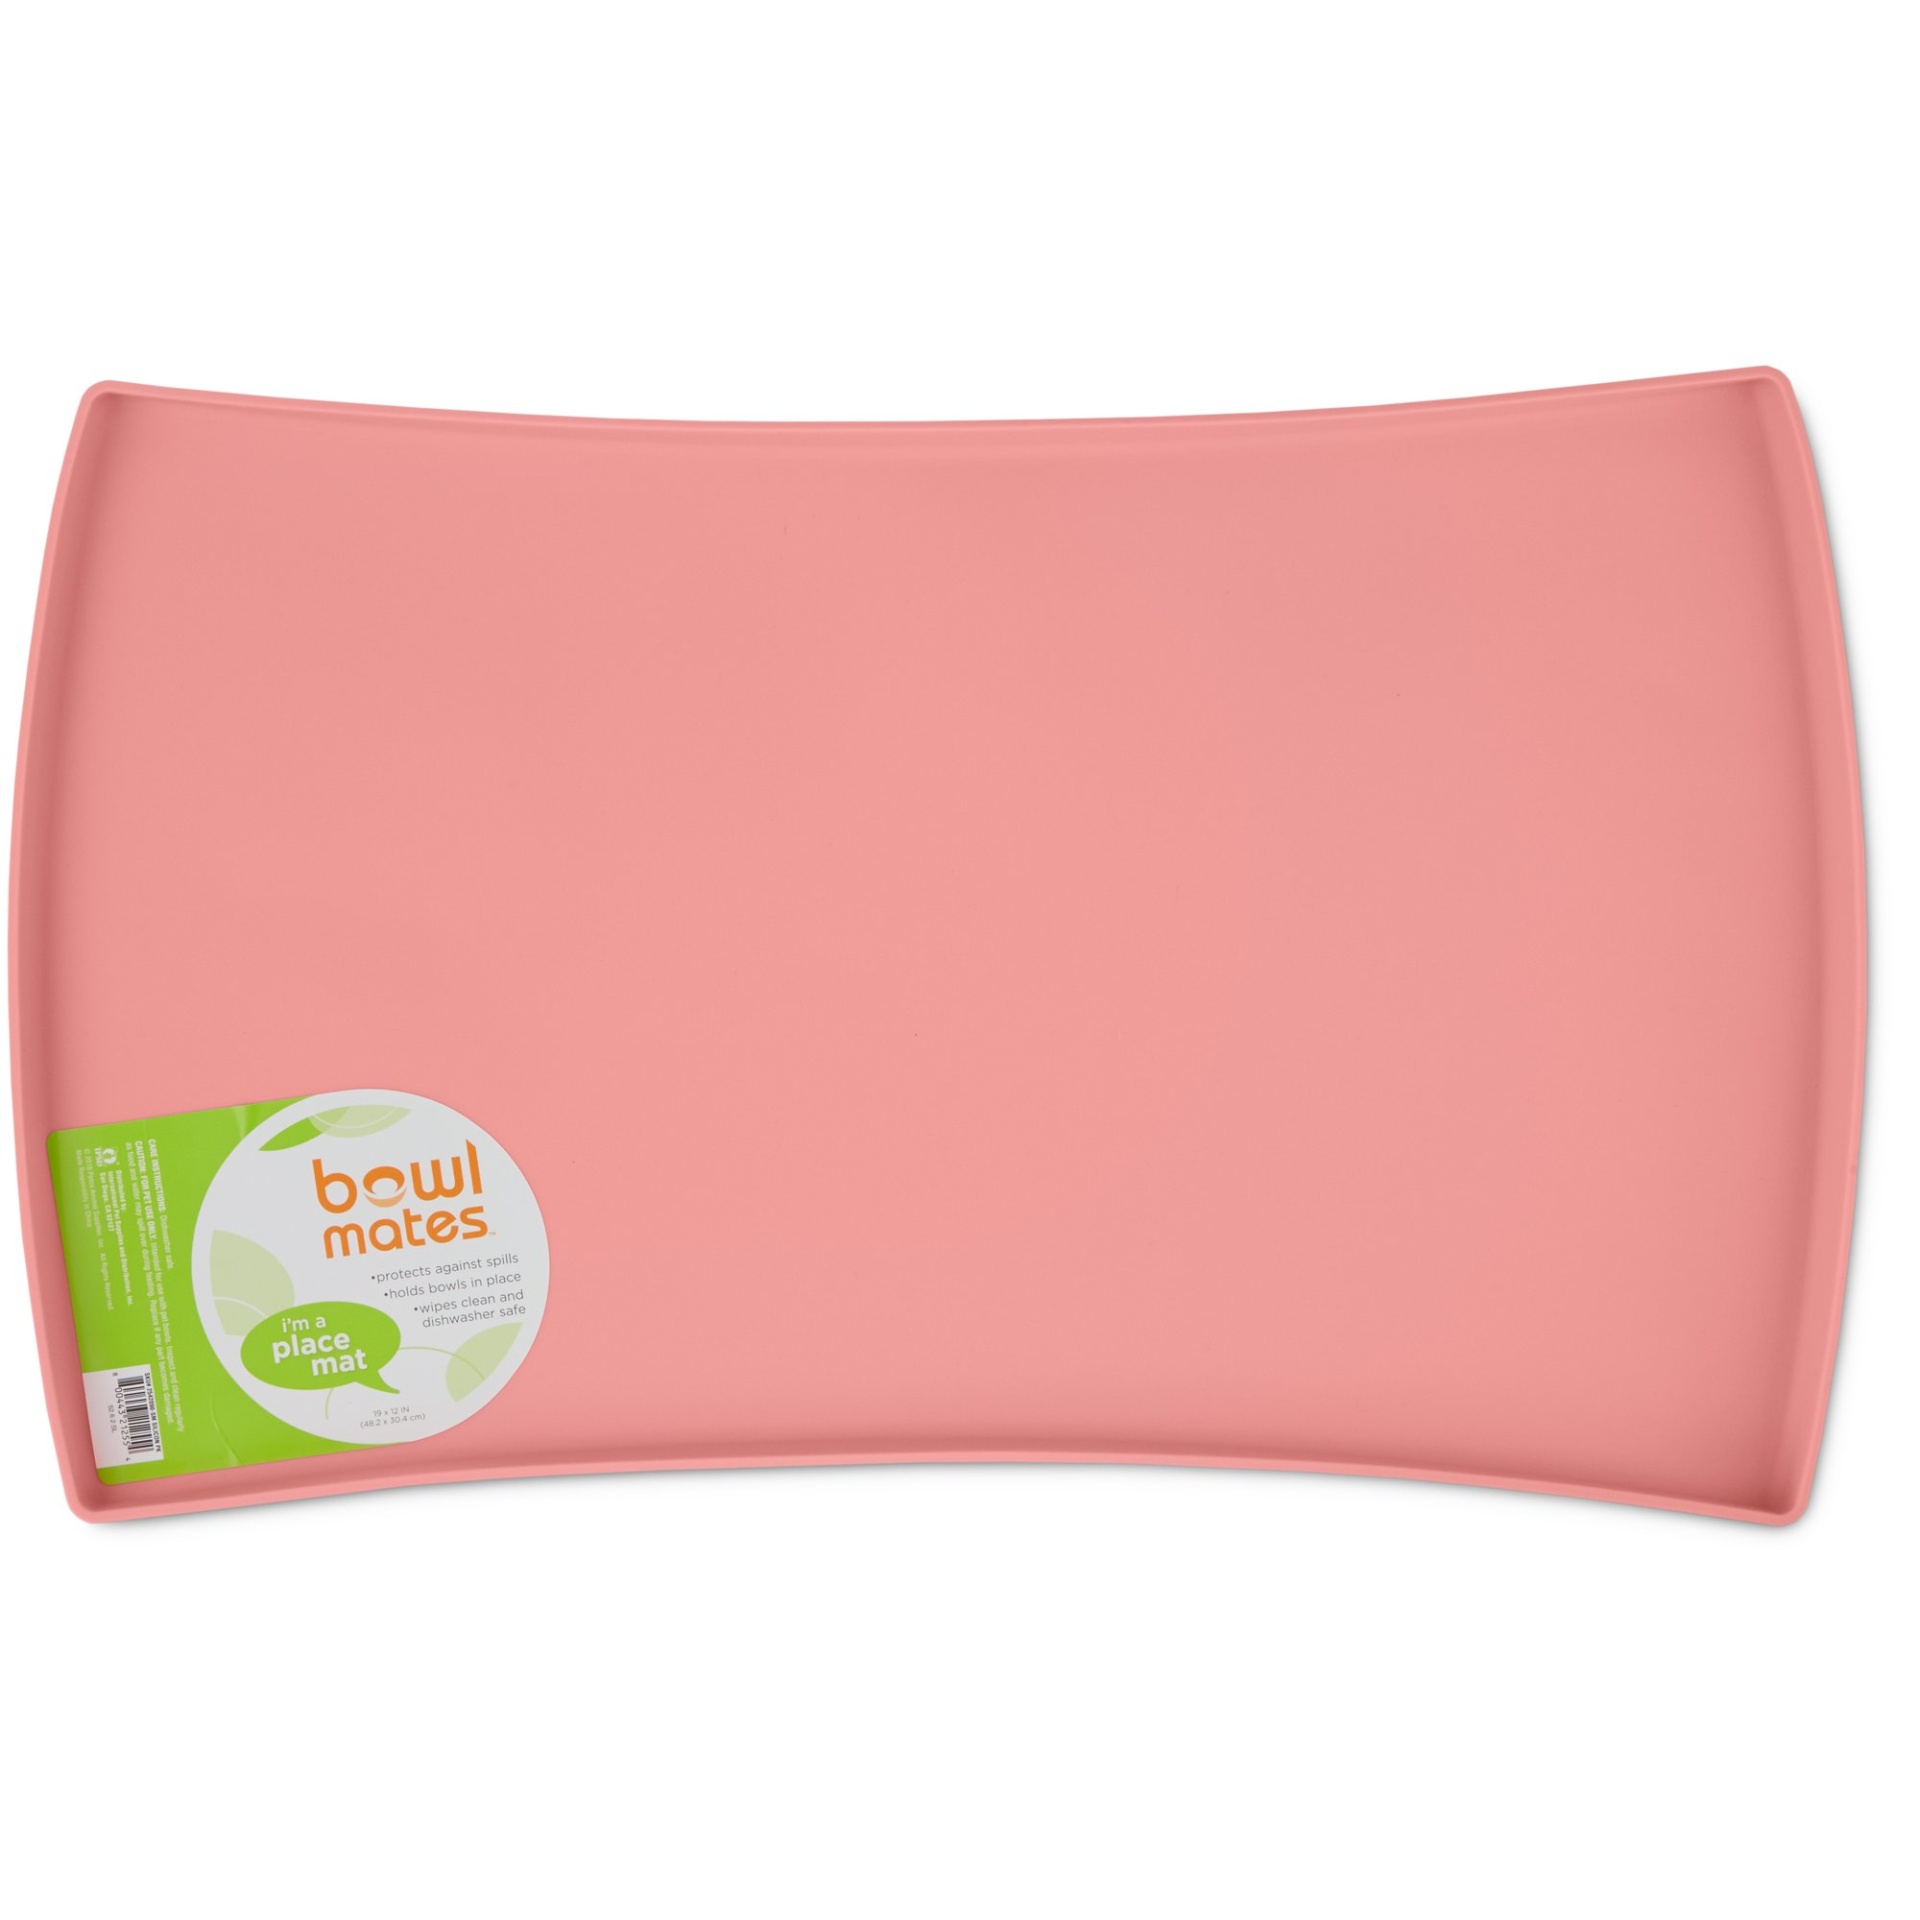 slide 1 of 1, Bowlmates Pink Silicone Placemat, SM